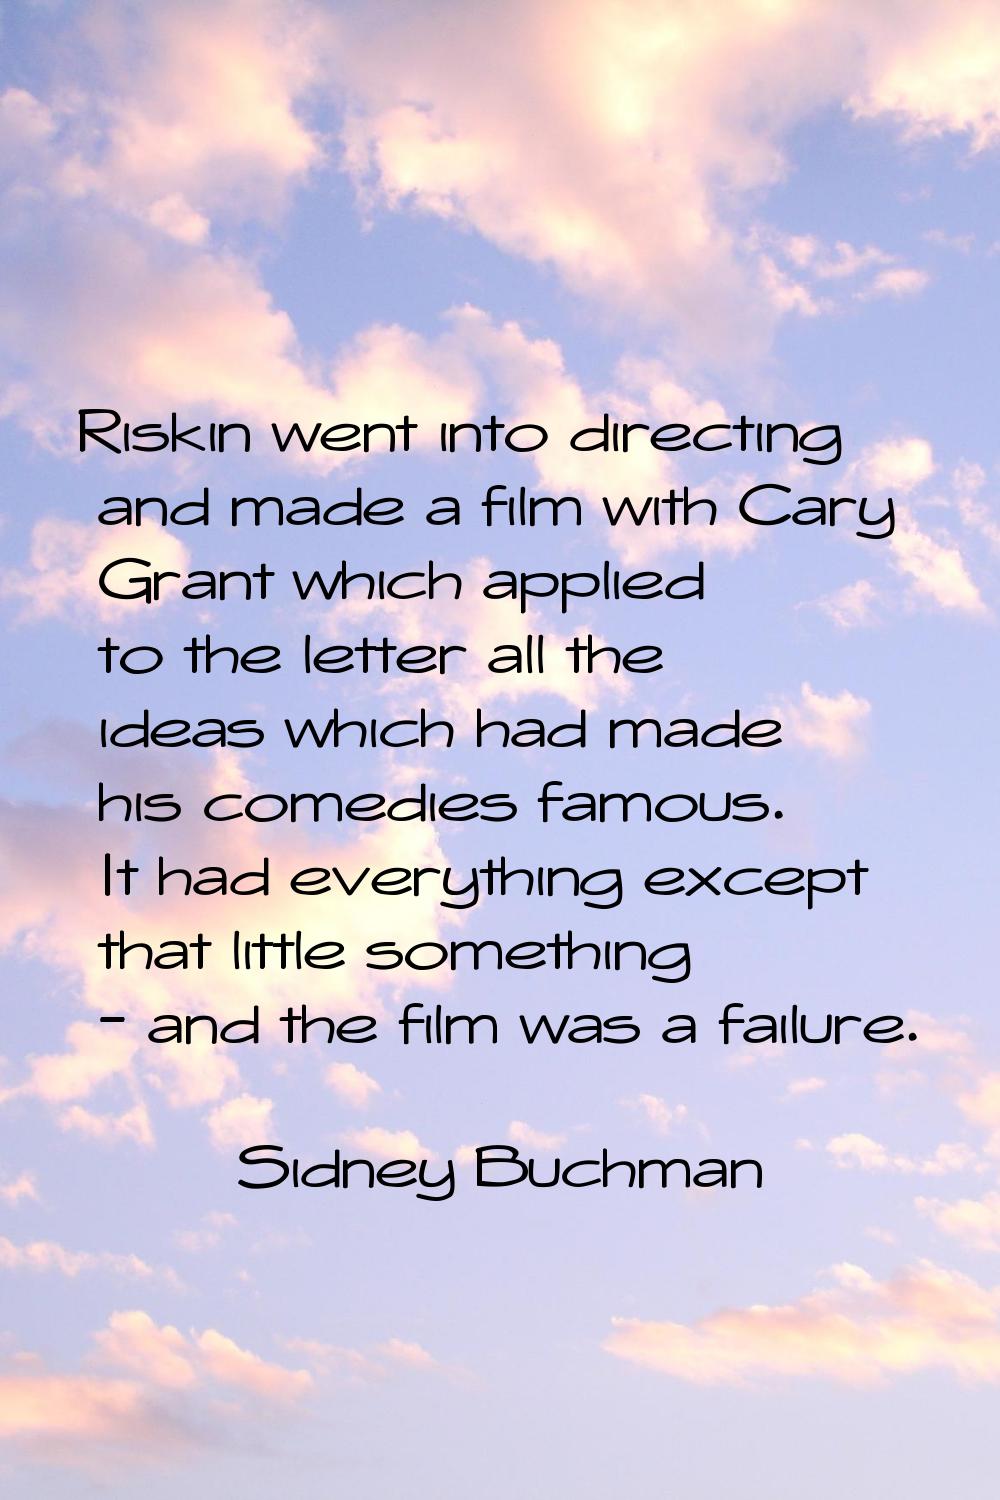 Riskin went into directing and made a film with Cary Grant which applied to the letter all the idea